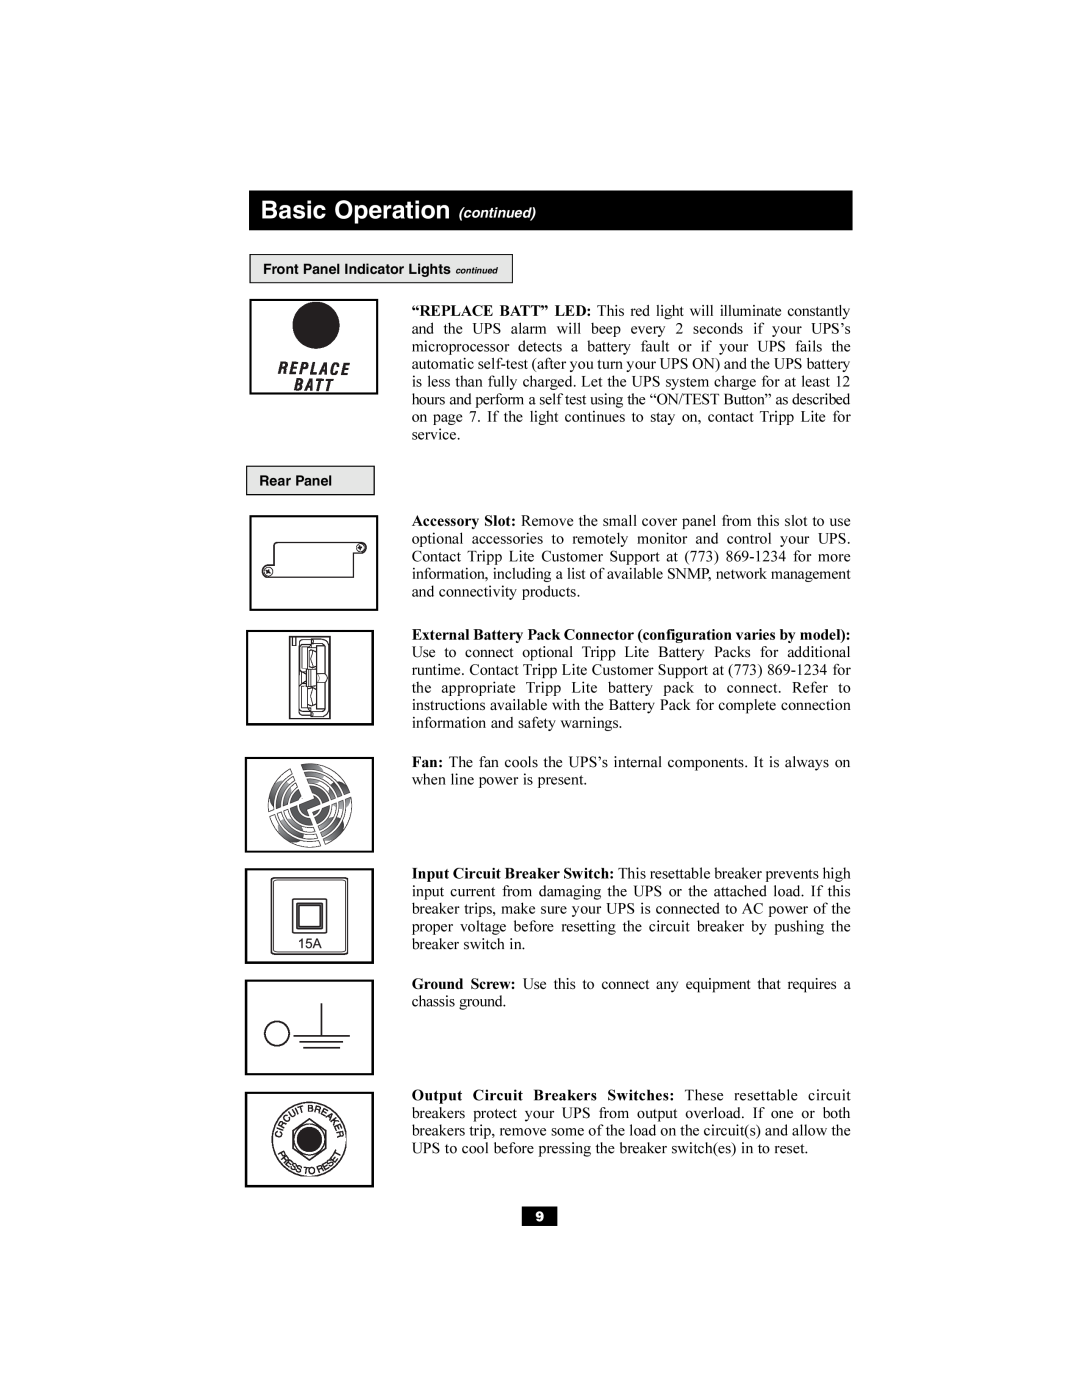 Tripp Lite 200703028, 93-2486 owner manual Basic Operation continued 